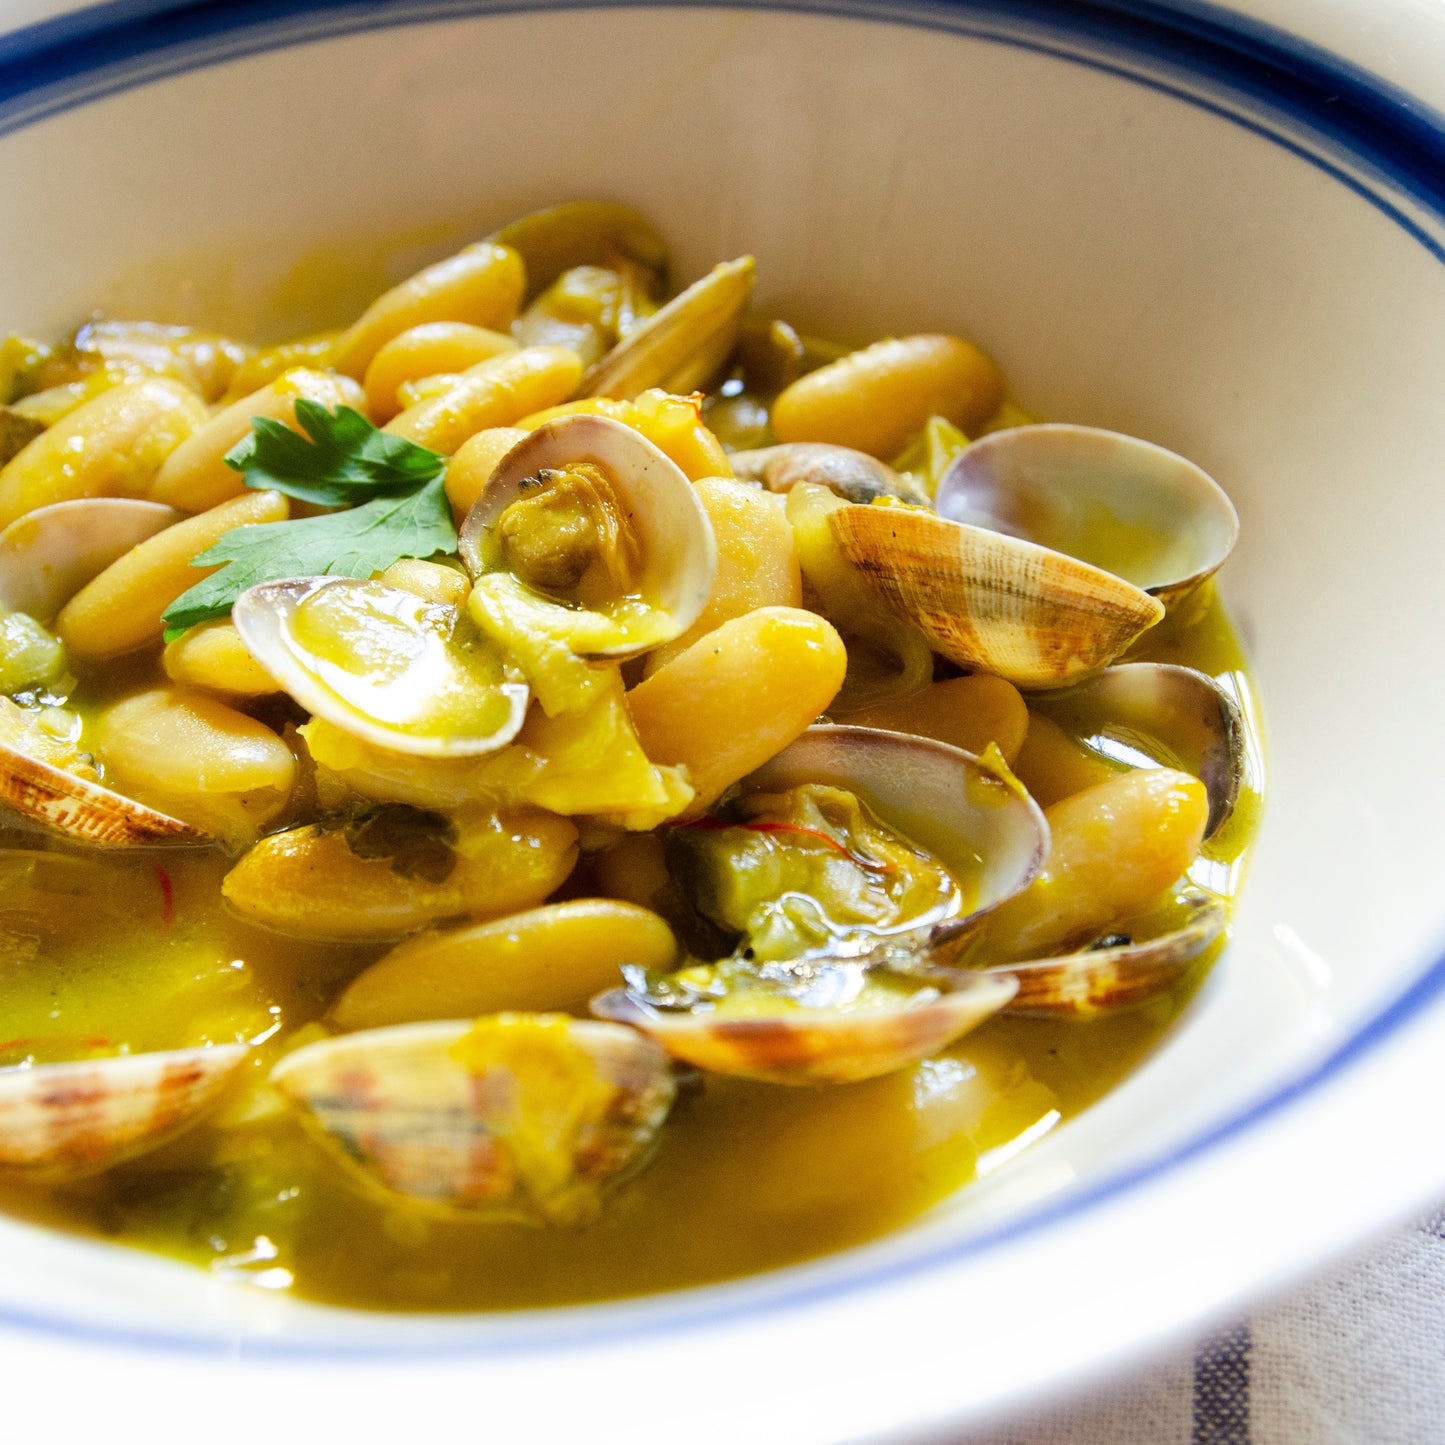 Mamia Fabes Beans with Clams 425 ml